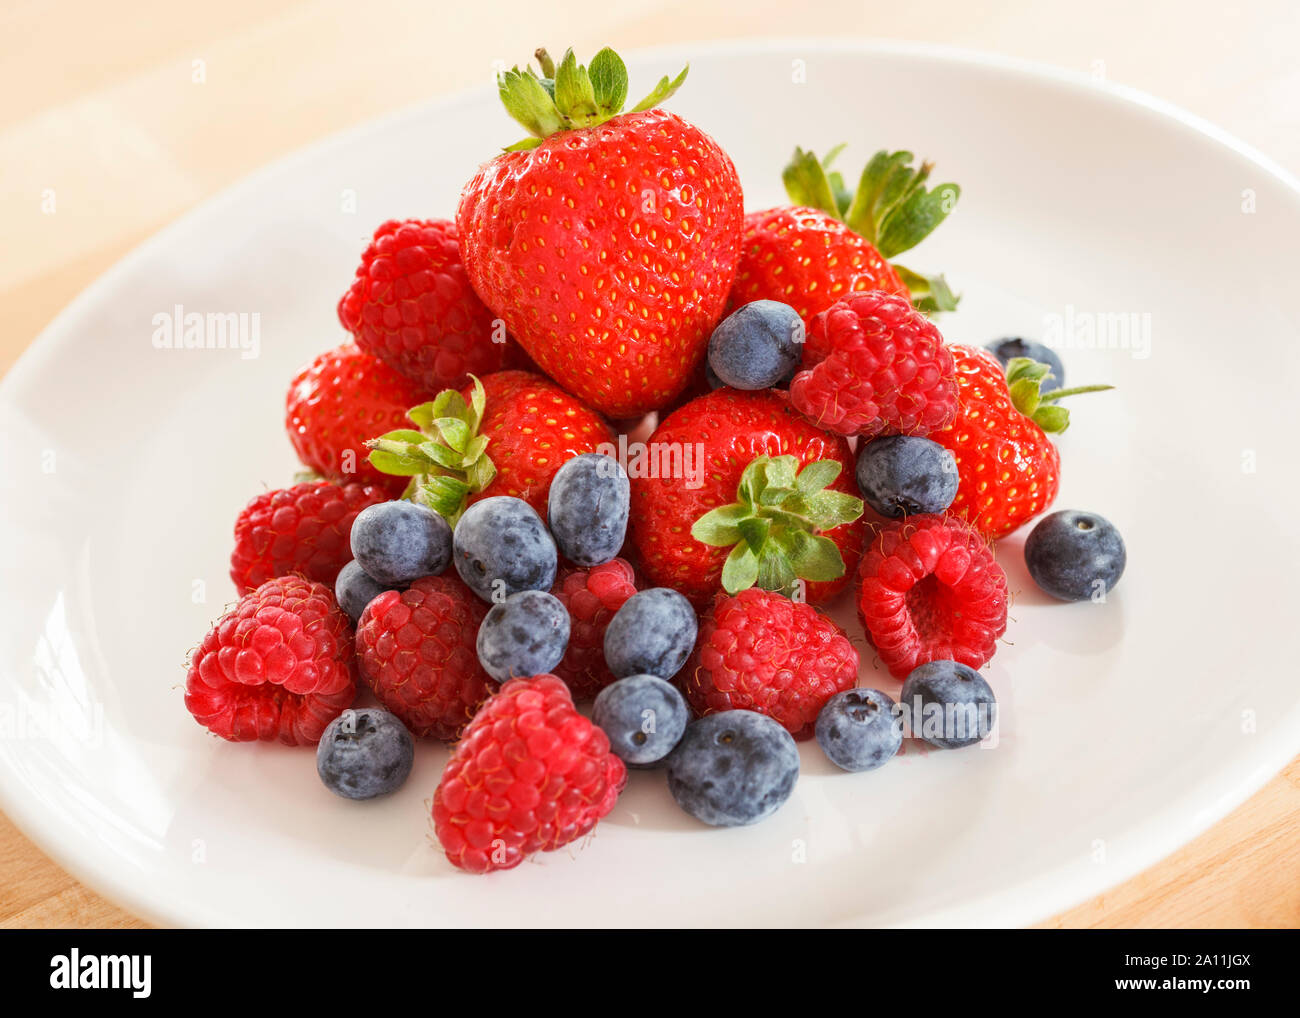 Pile of mixed berries on a white plate Stock Photo